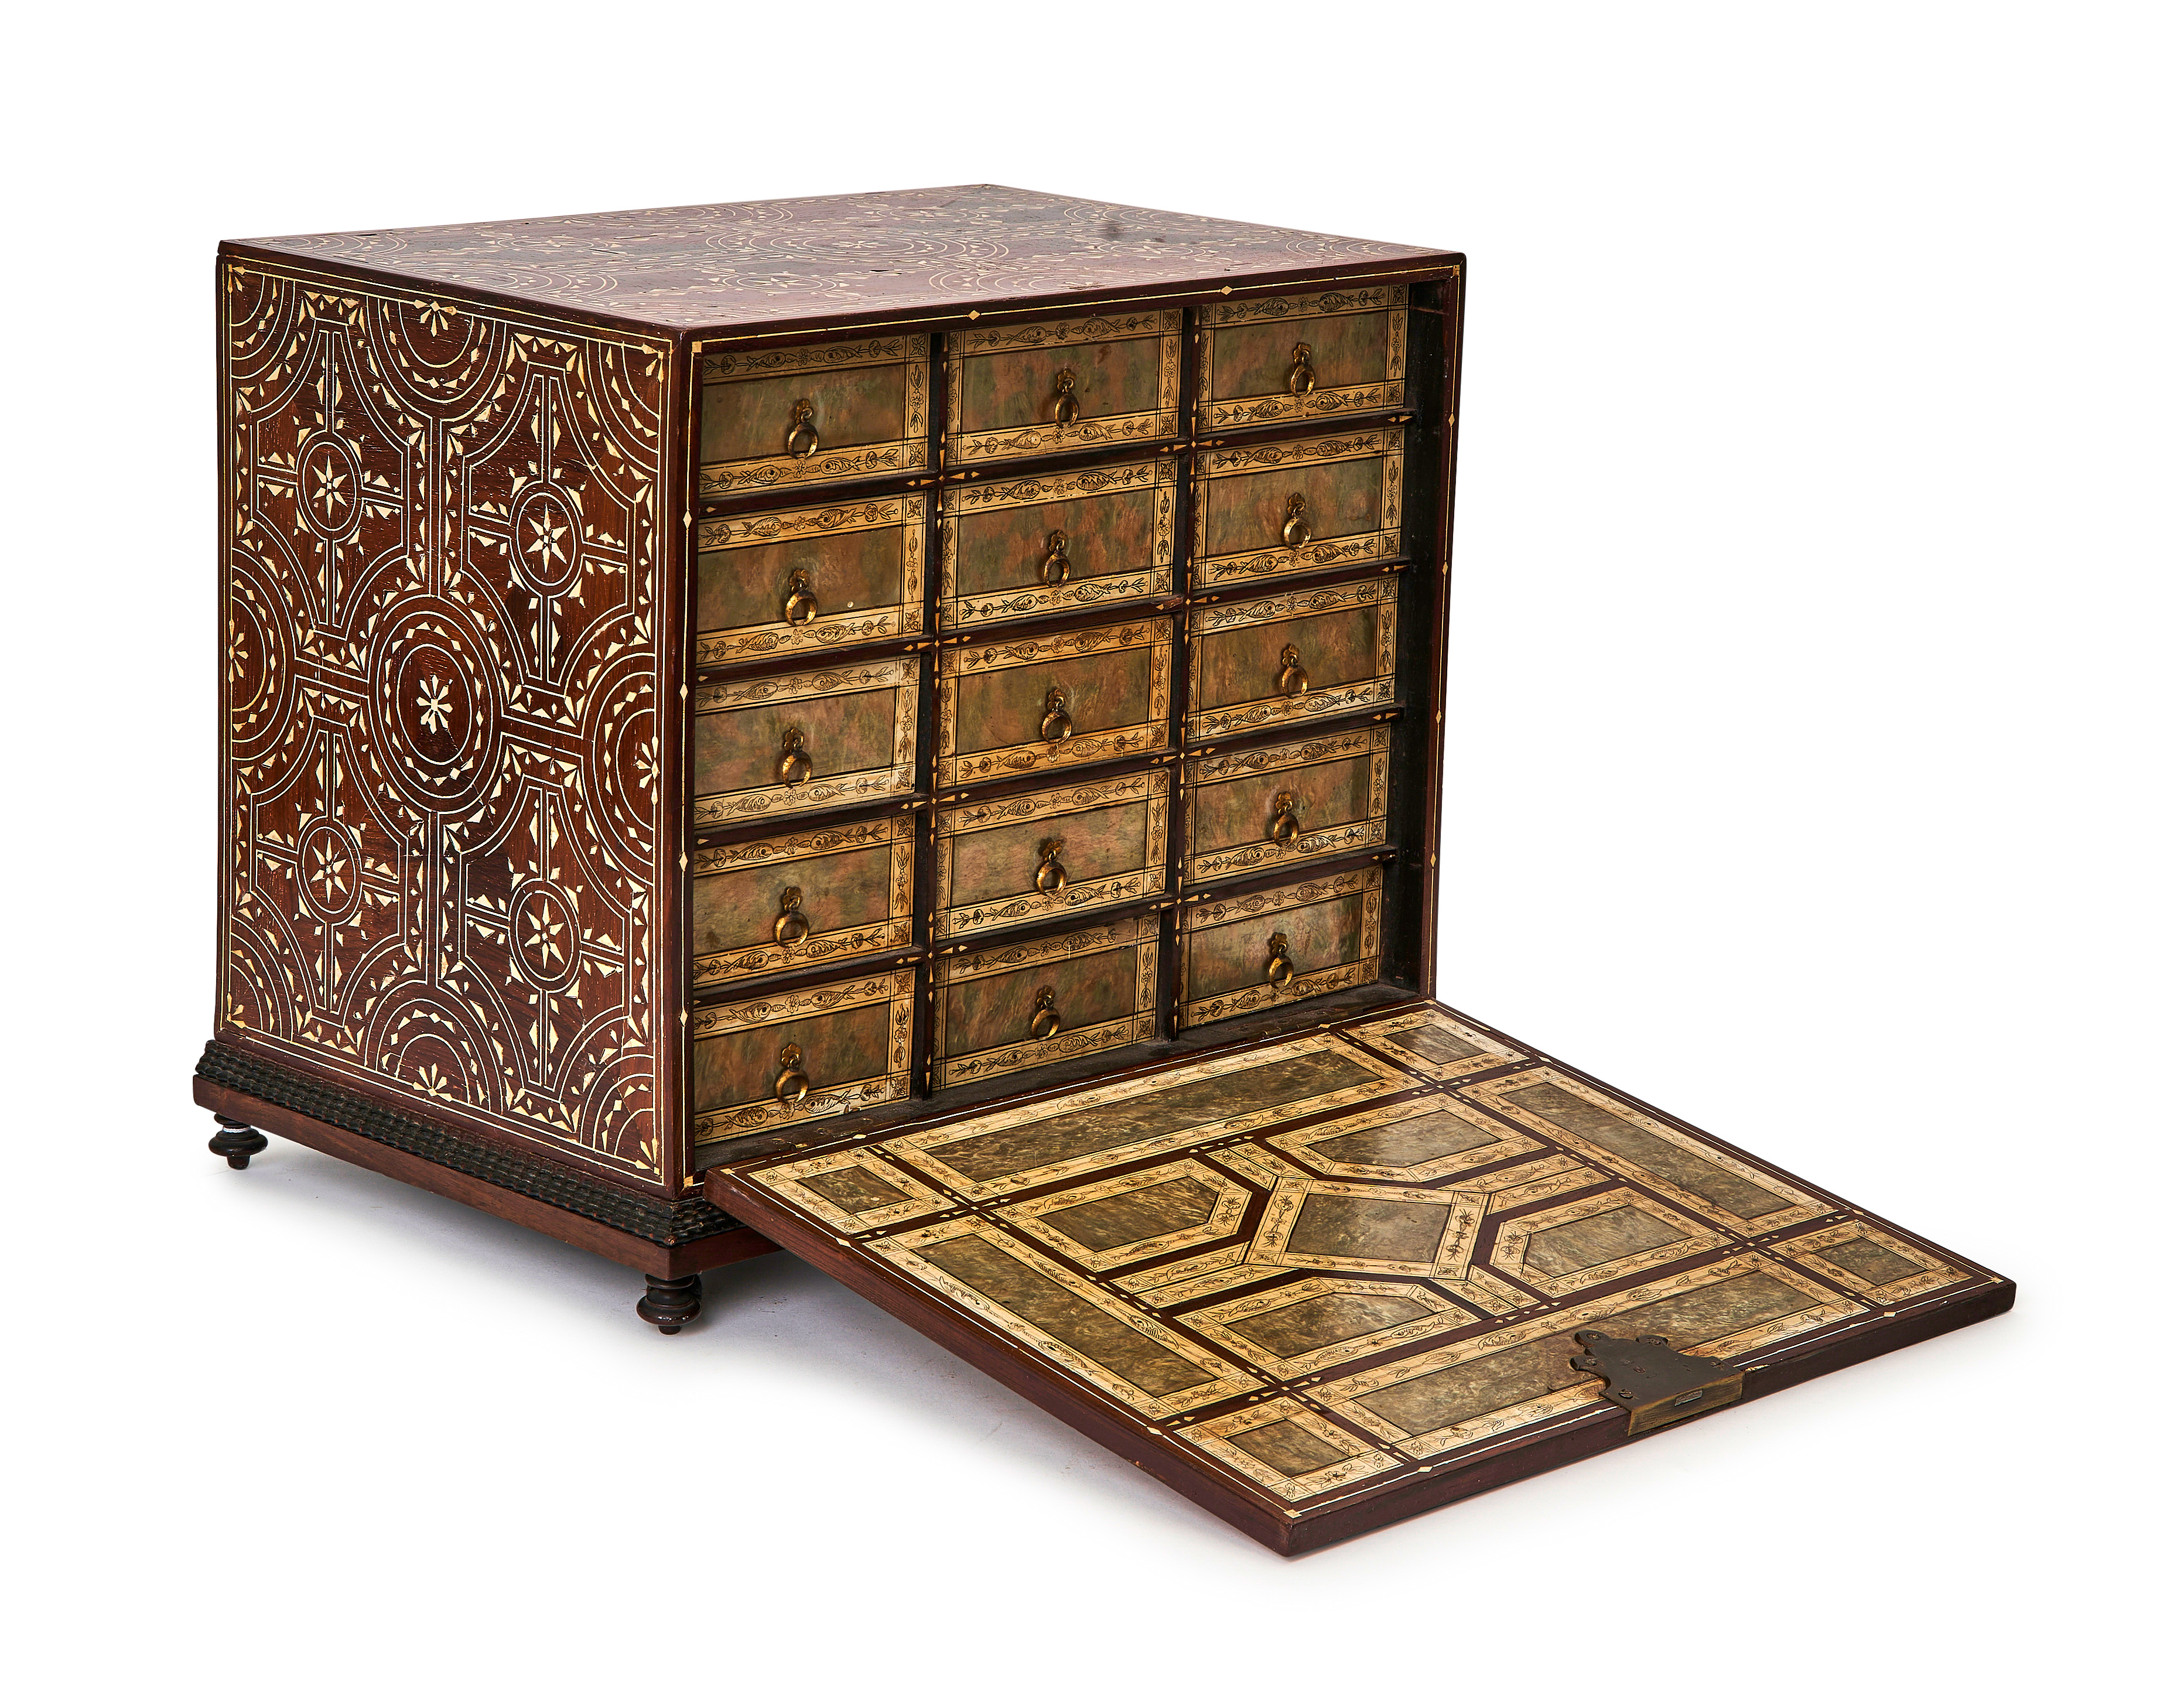 A GESSO & REISIN INLAID WRITING TABLE CABINET, 19TH CENTURY, ITALIAN OR GERMANY